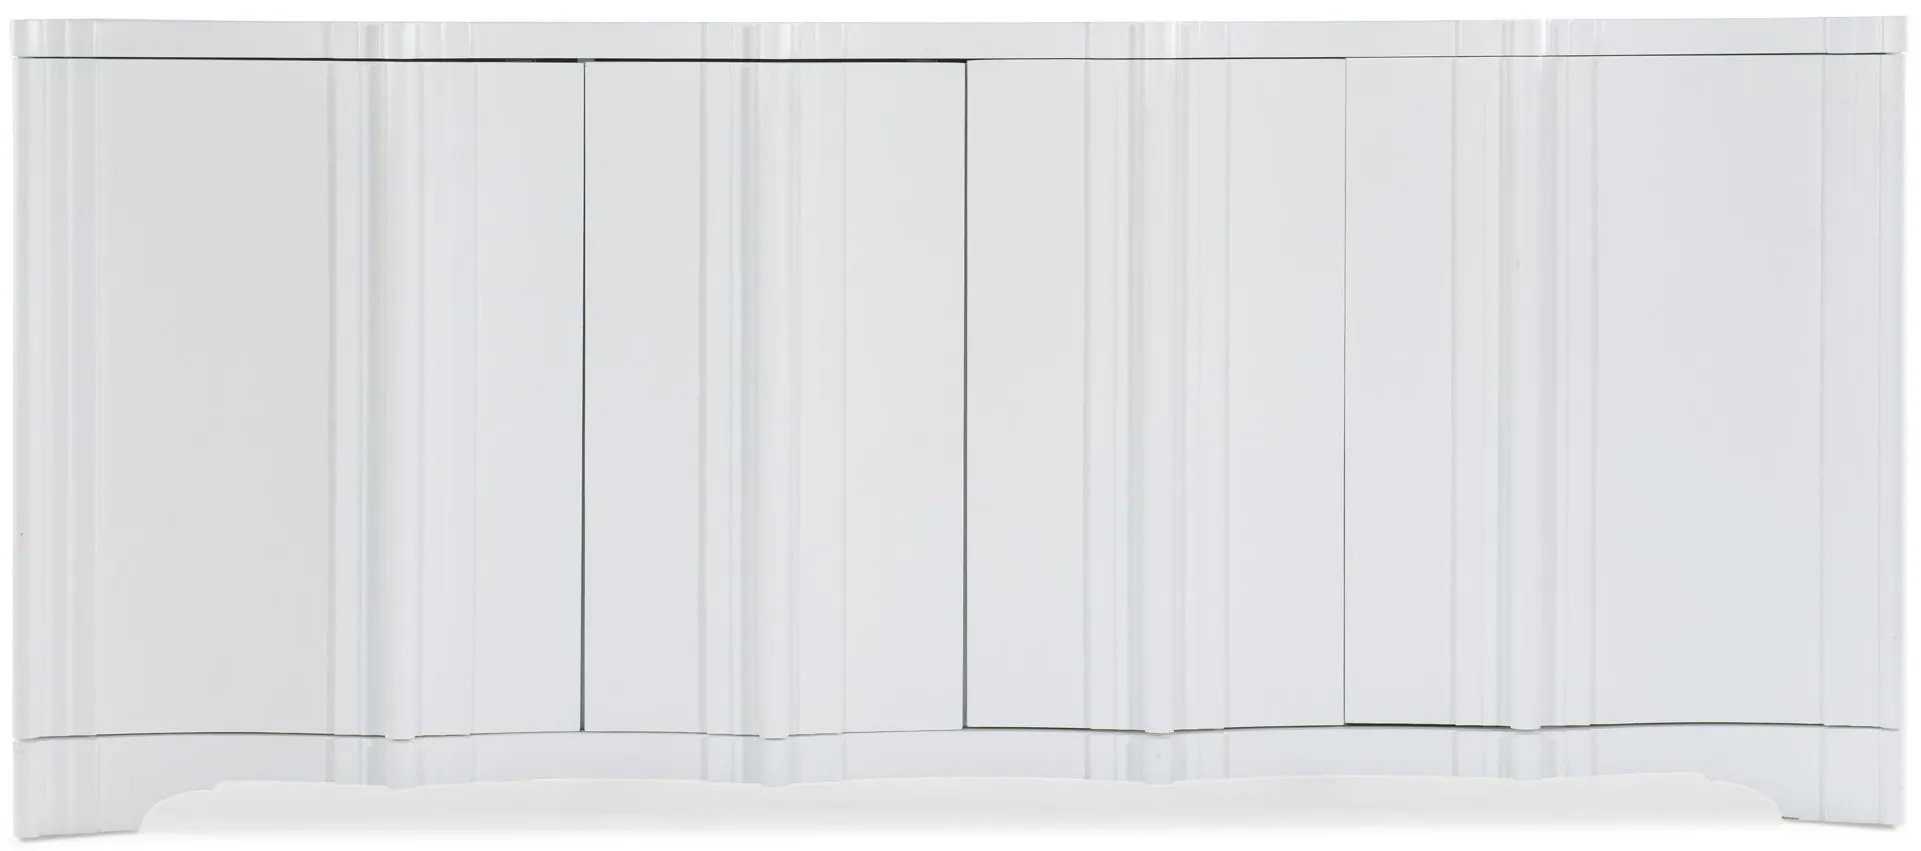 Melange Four Door Entertainment Console in White by Hooker Furniture